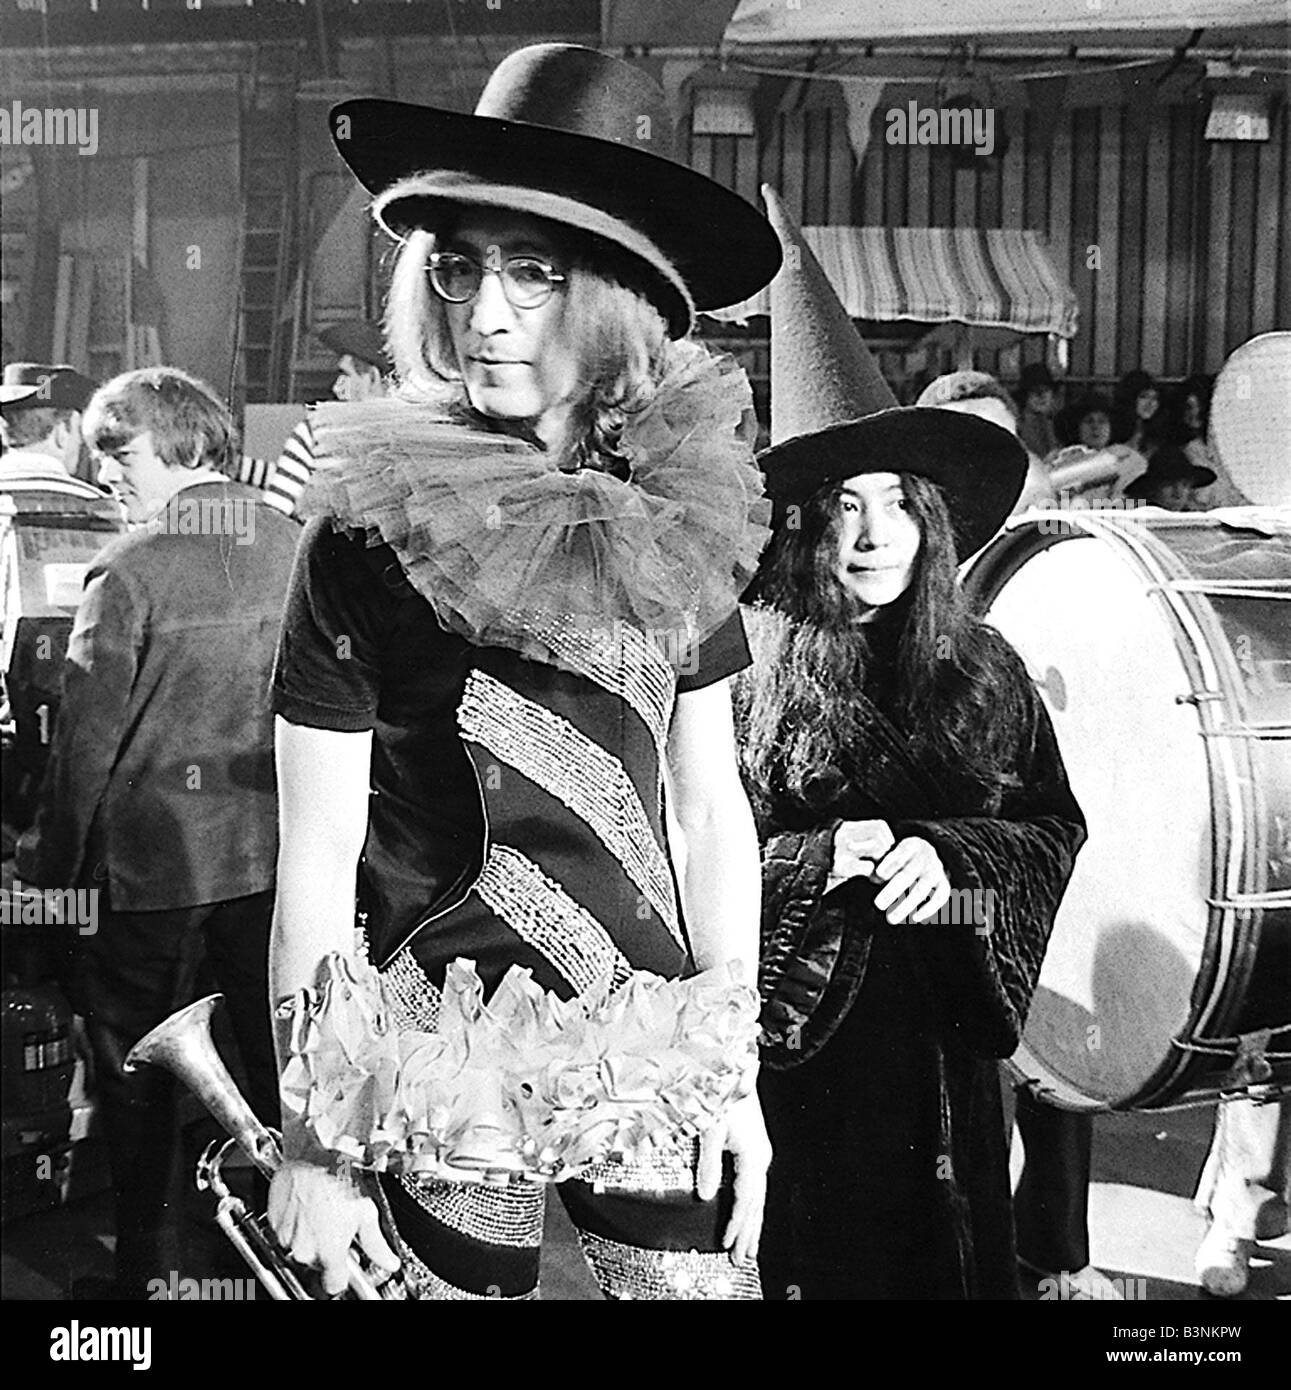 Beatles files 1968 John Lennon with Yoko Ono during filming of Rolling  Stones Rock Roll Circus December 1968 Stock Photo - Alamy